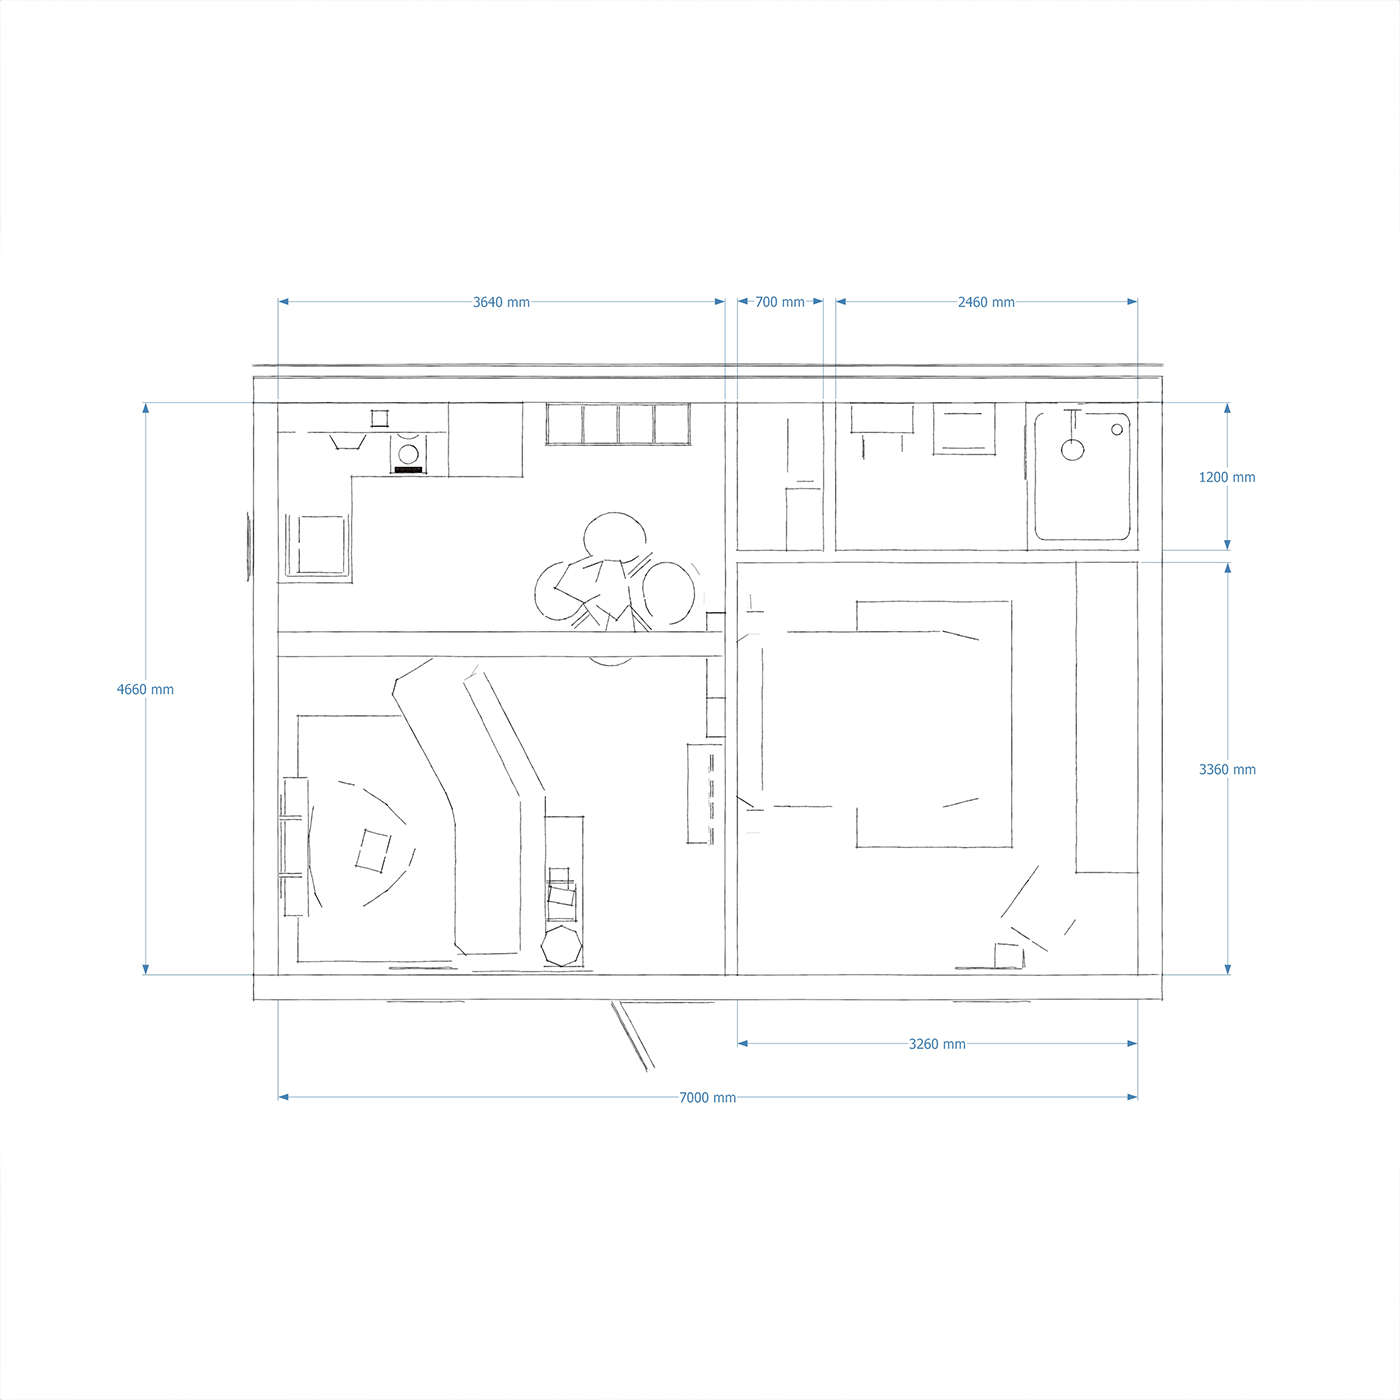 Interior dimensions for live-in garden room 5.0m by 7.4m